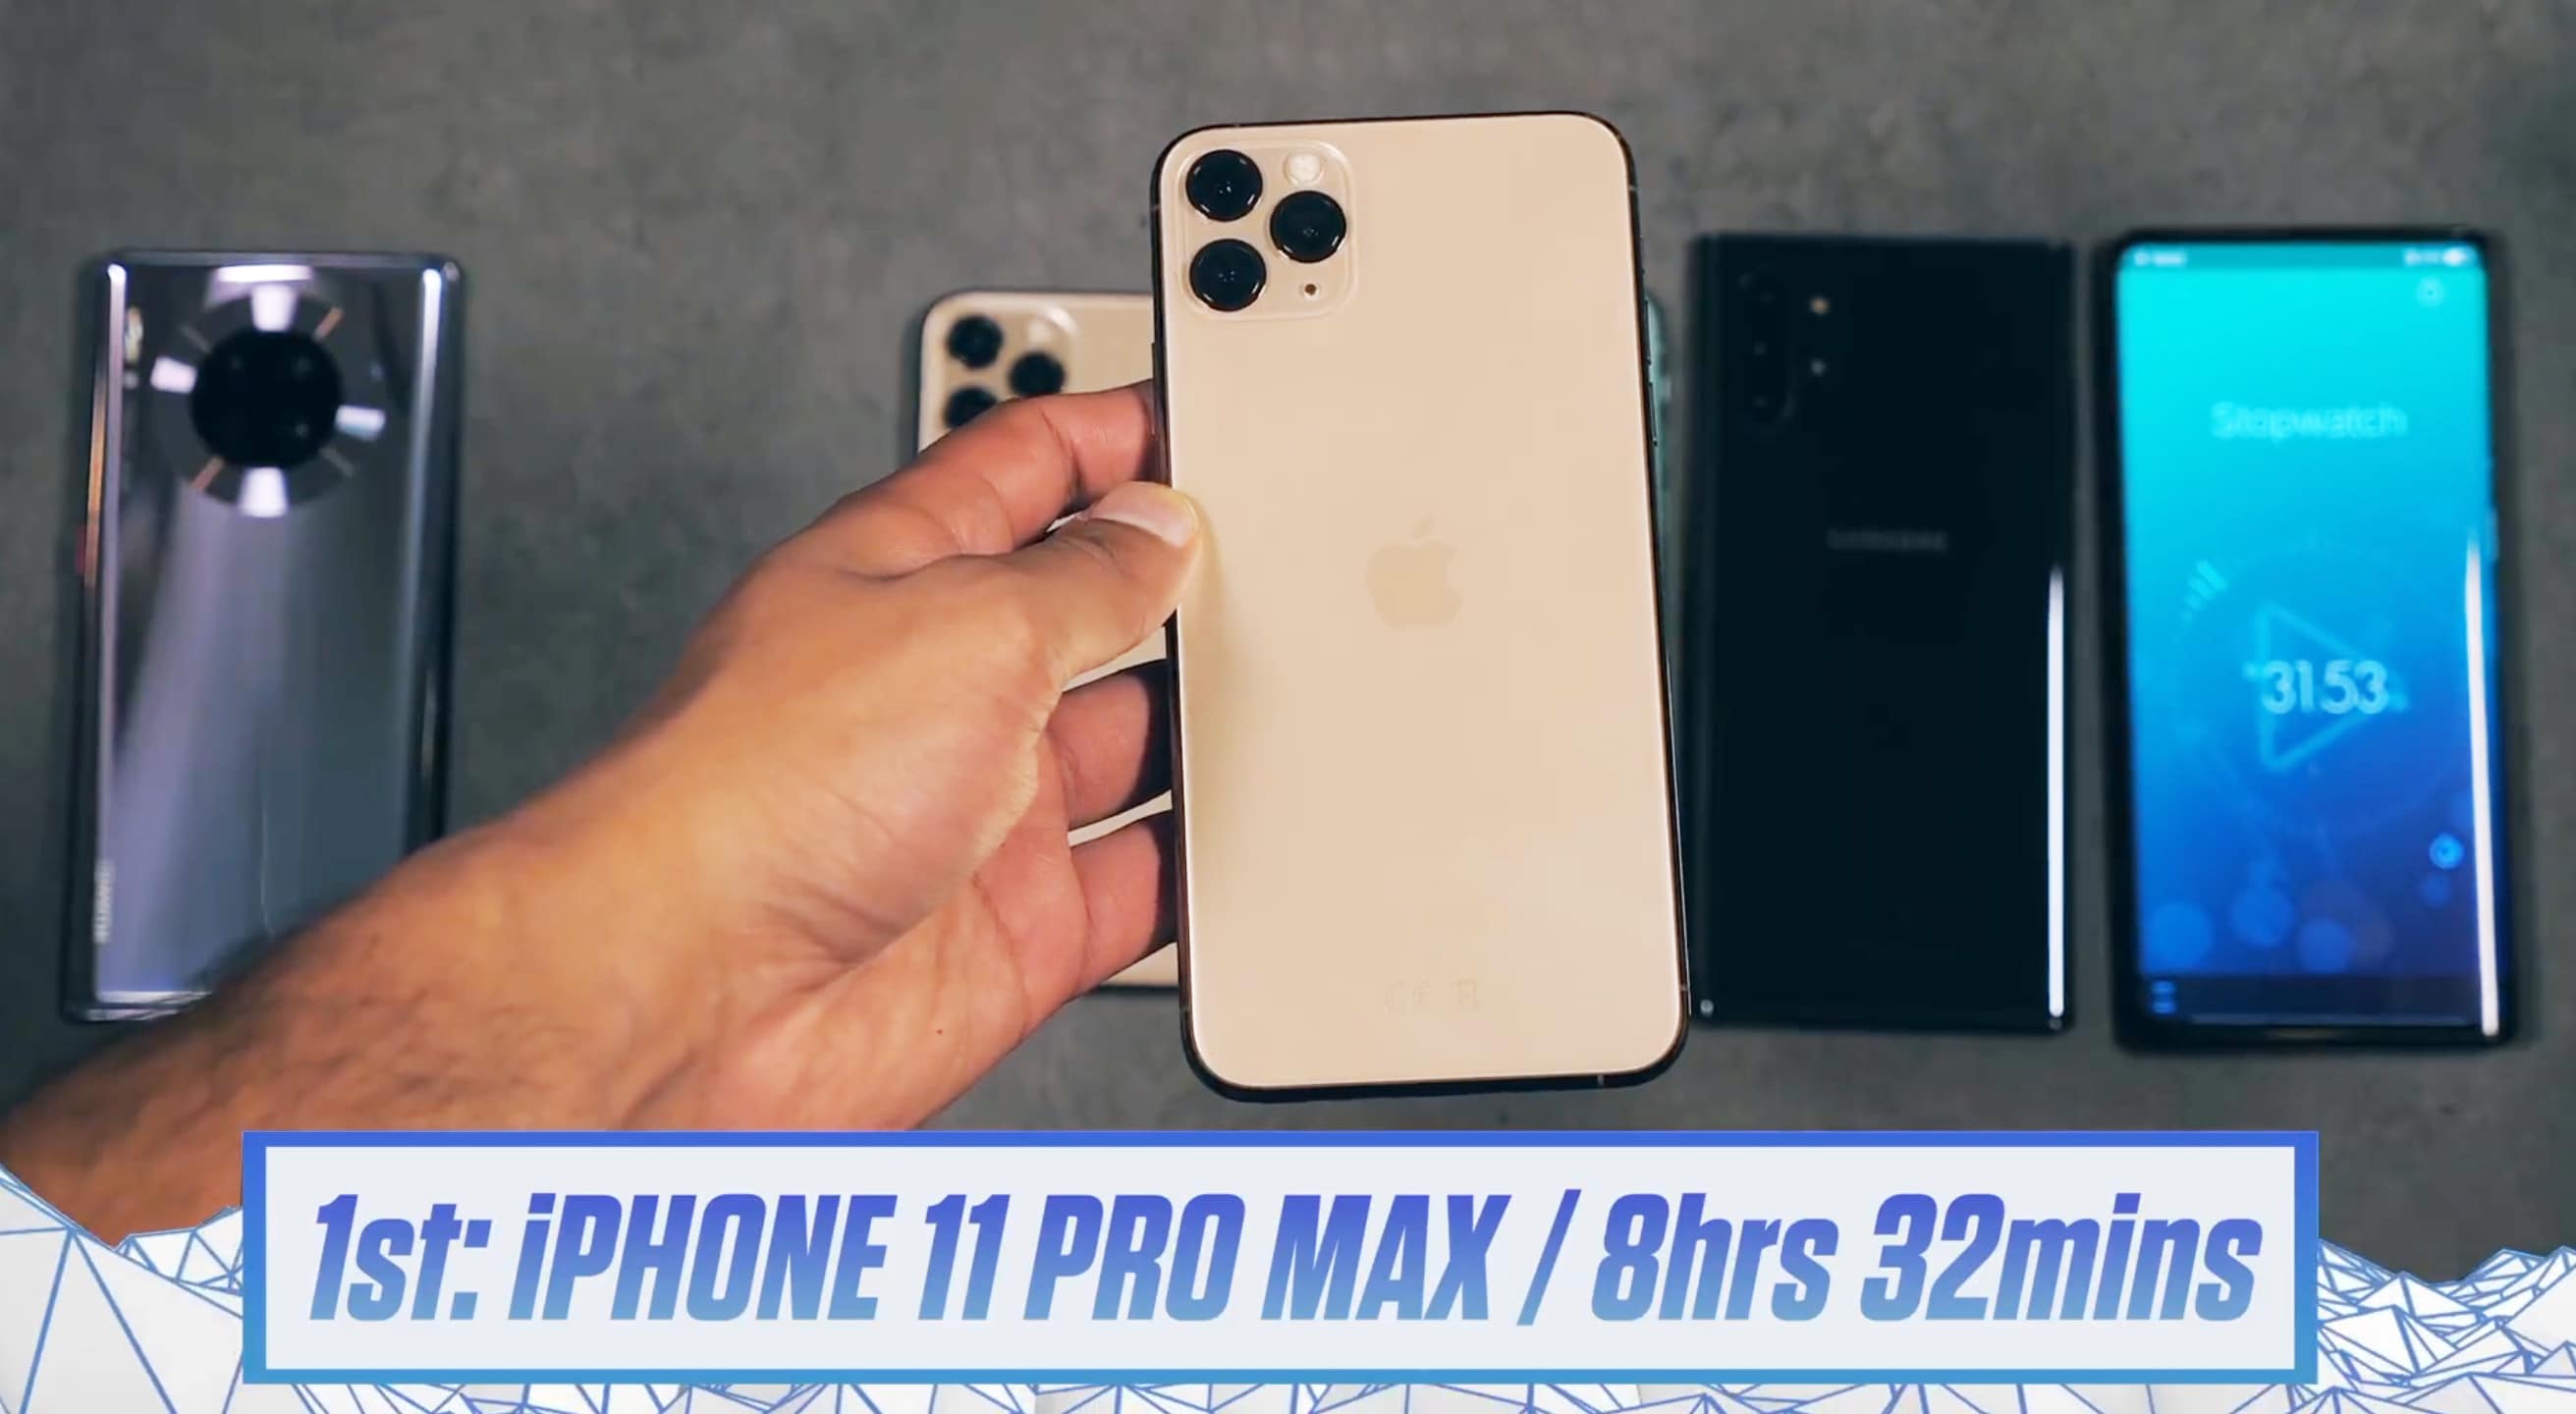 iPhone 11 Pro Max battery outlasts four recently-released smartphones